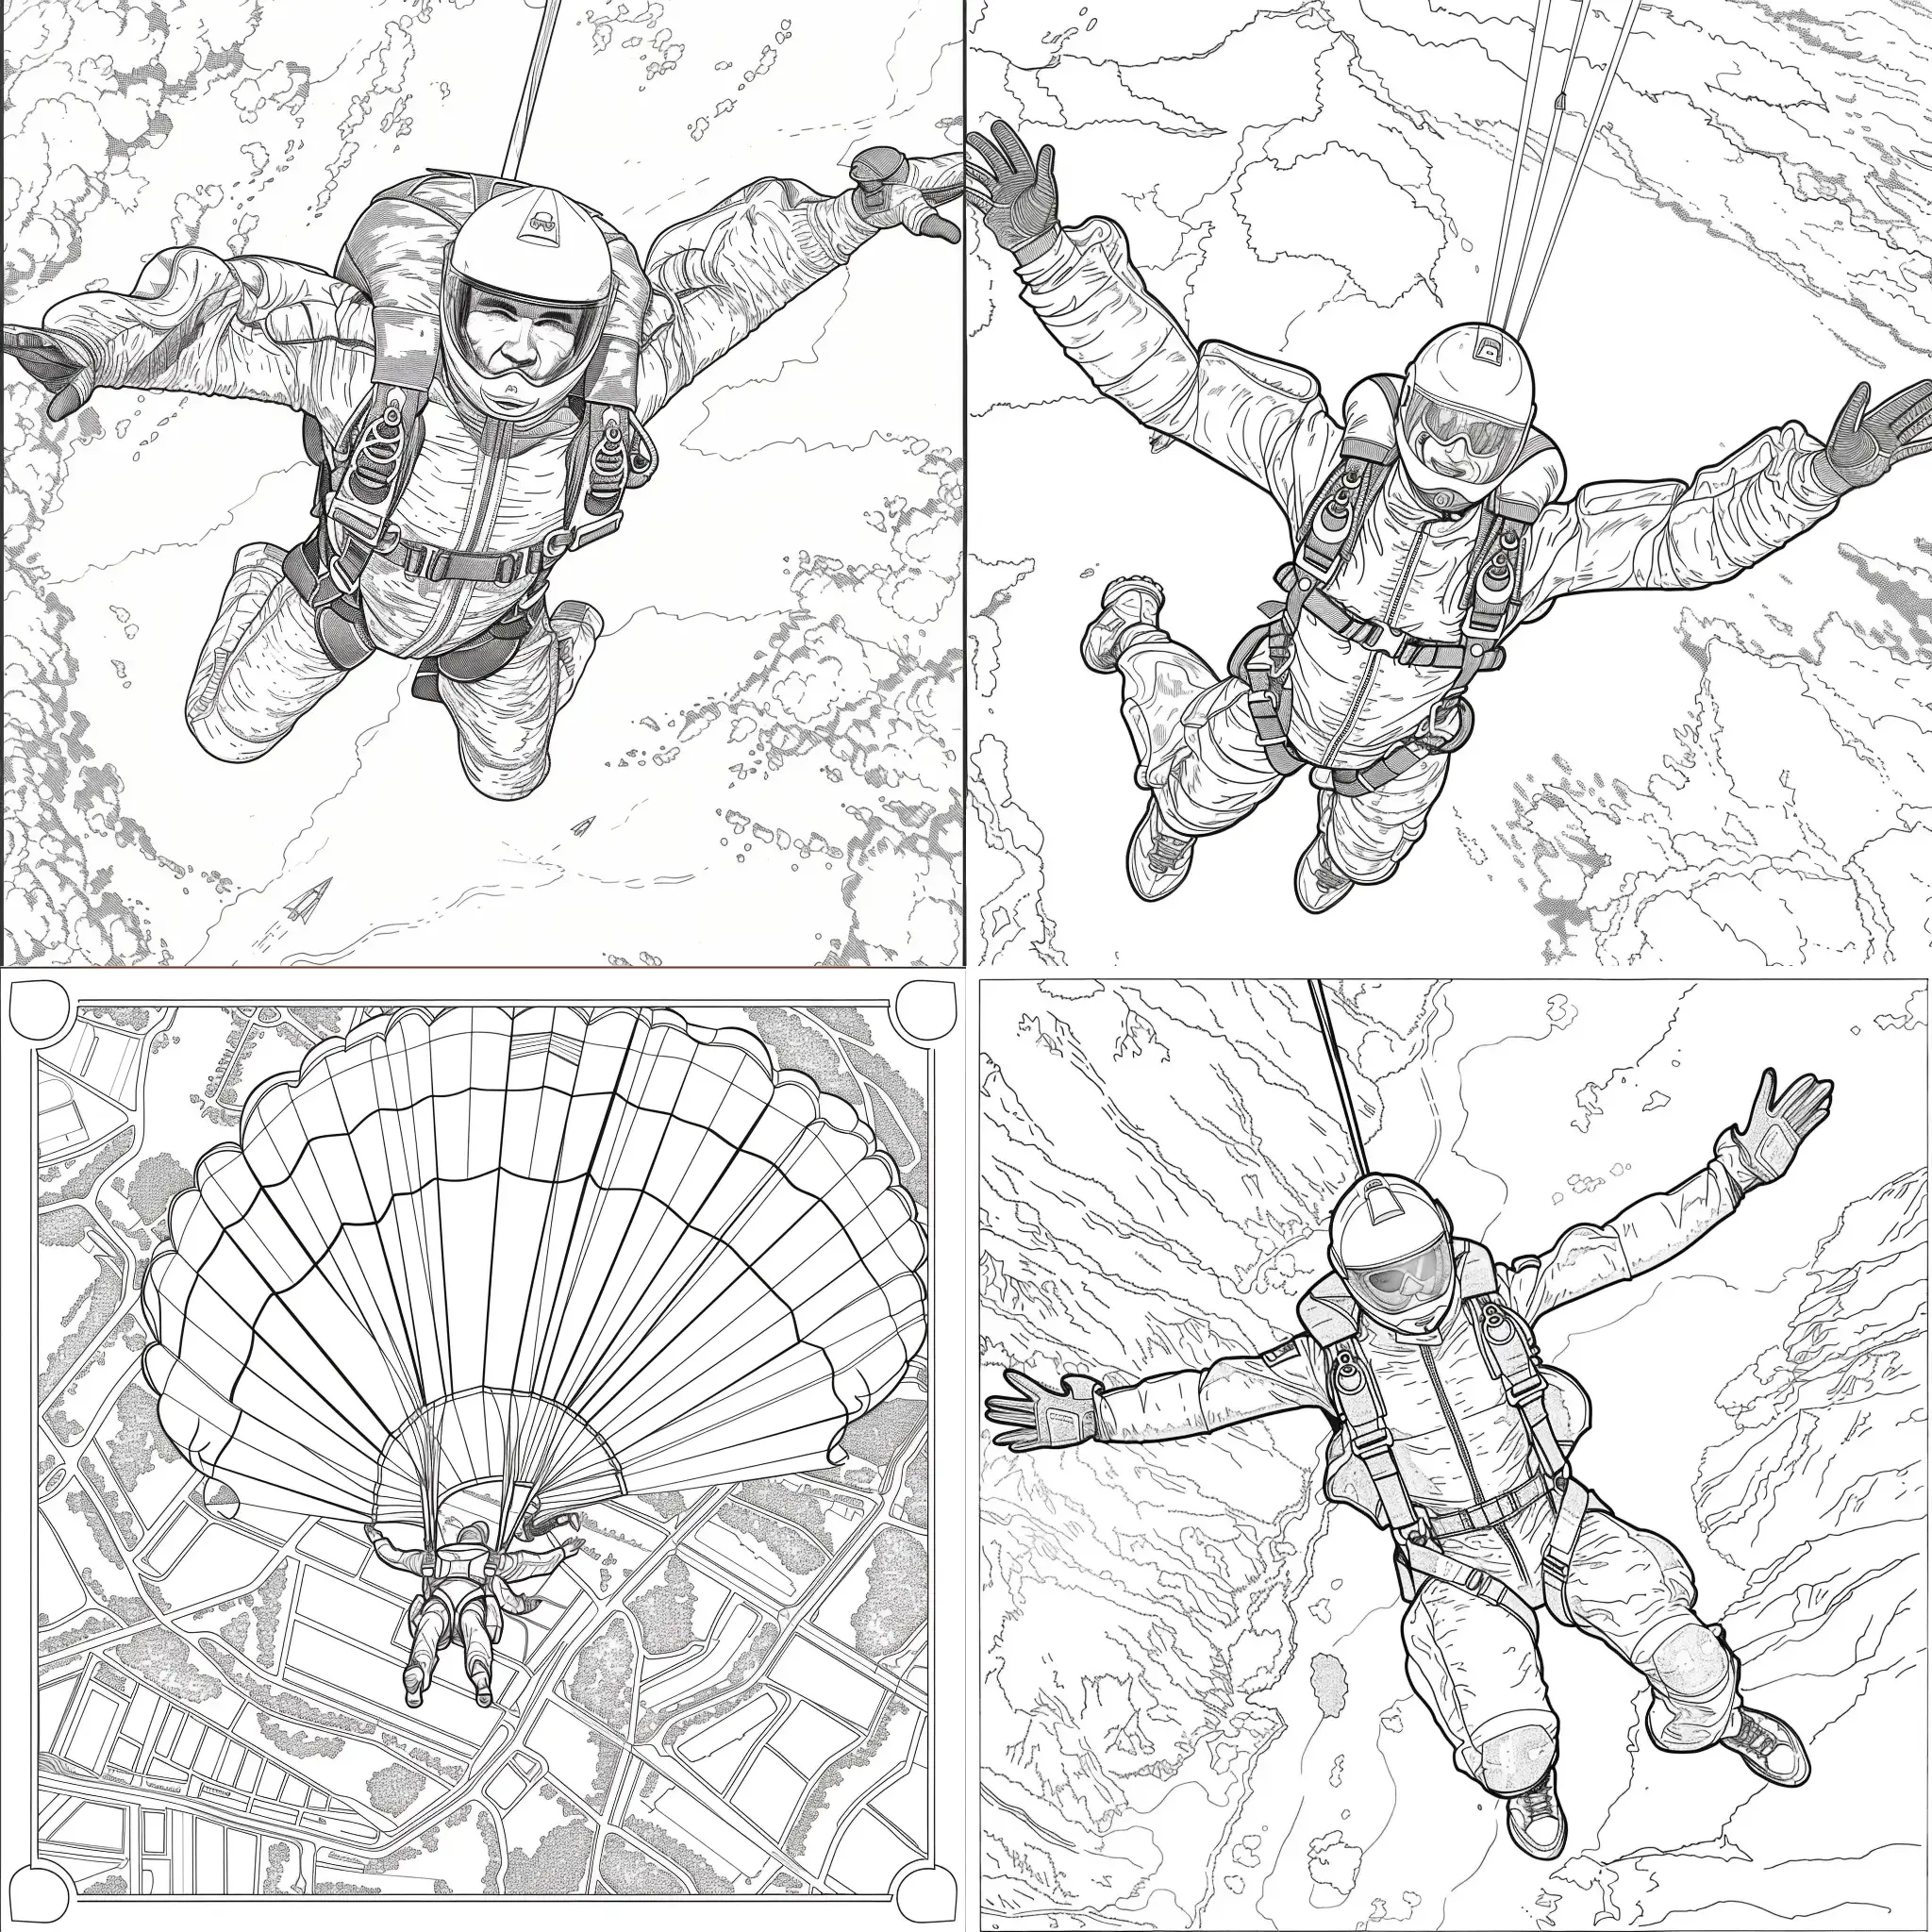 Thrilling-Skydiving-Adventure-Coloring-Page